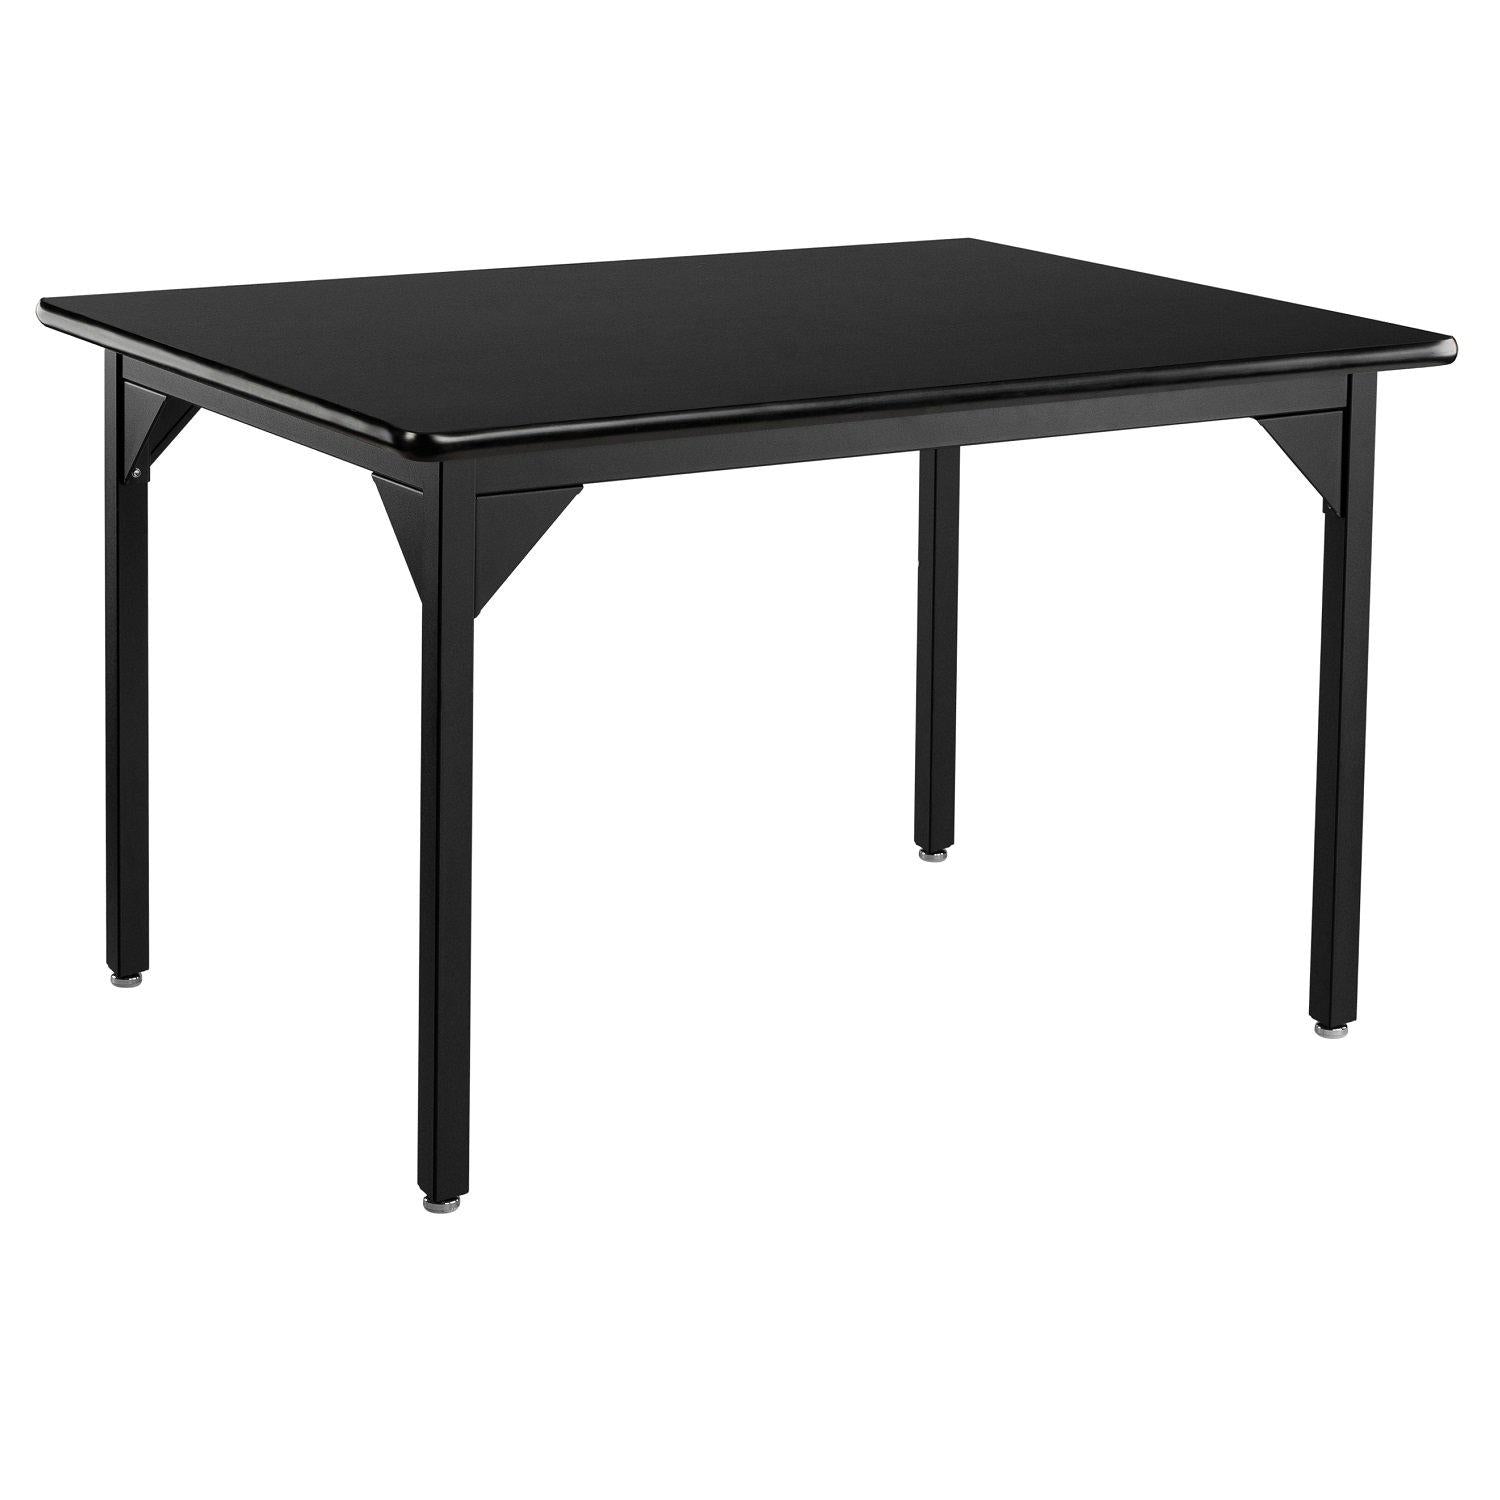 Heavy-Duty Fixed Height Utility Table, Black Frame, 36" x 42", High-Pressure Laminate Top with T-Mold Edge